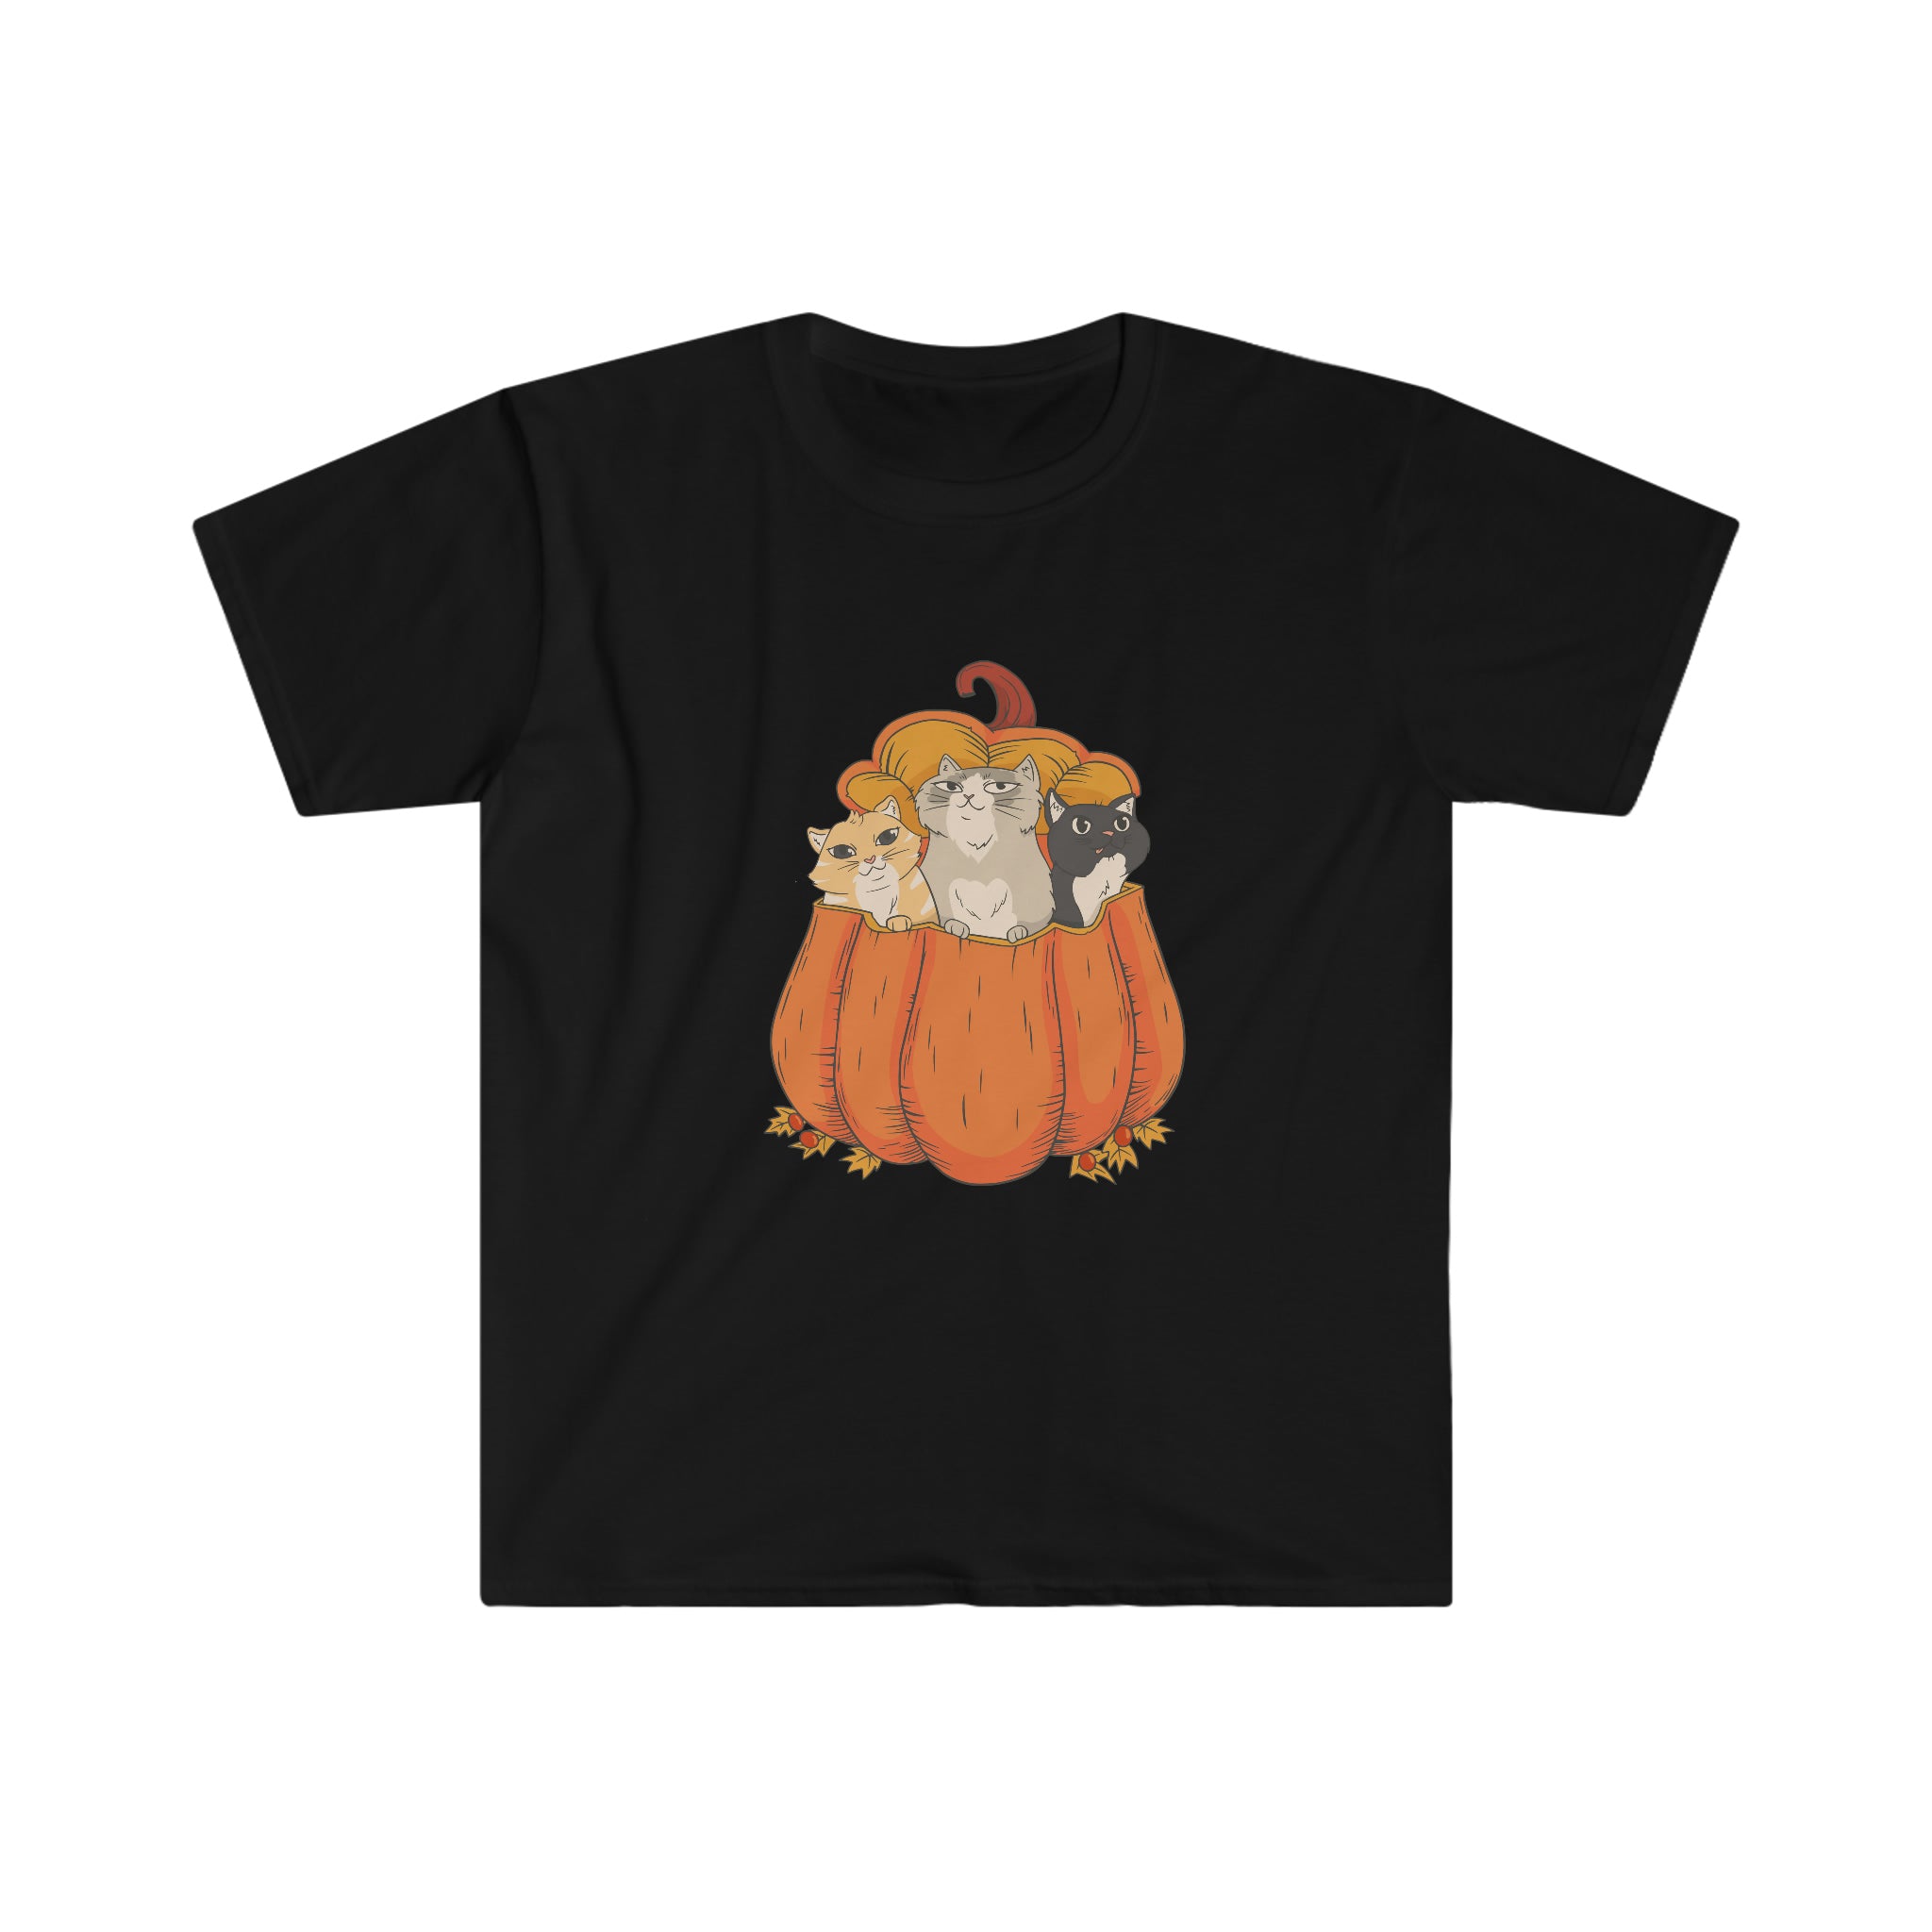 A Halloween Cats T-shirt with a cartoon of animals, such as cats, on it.